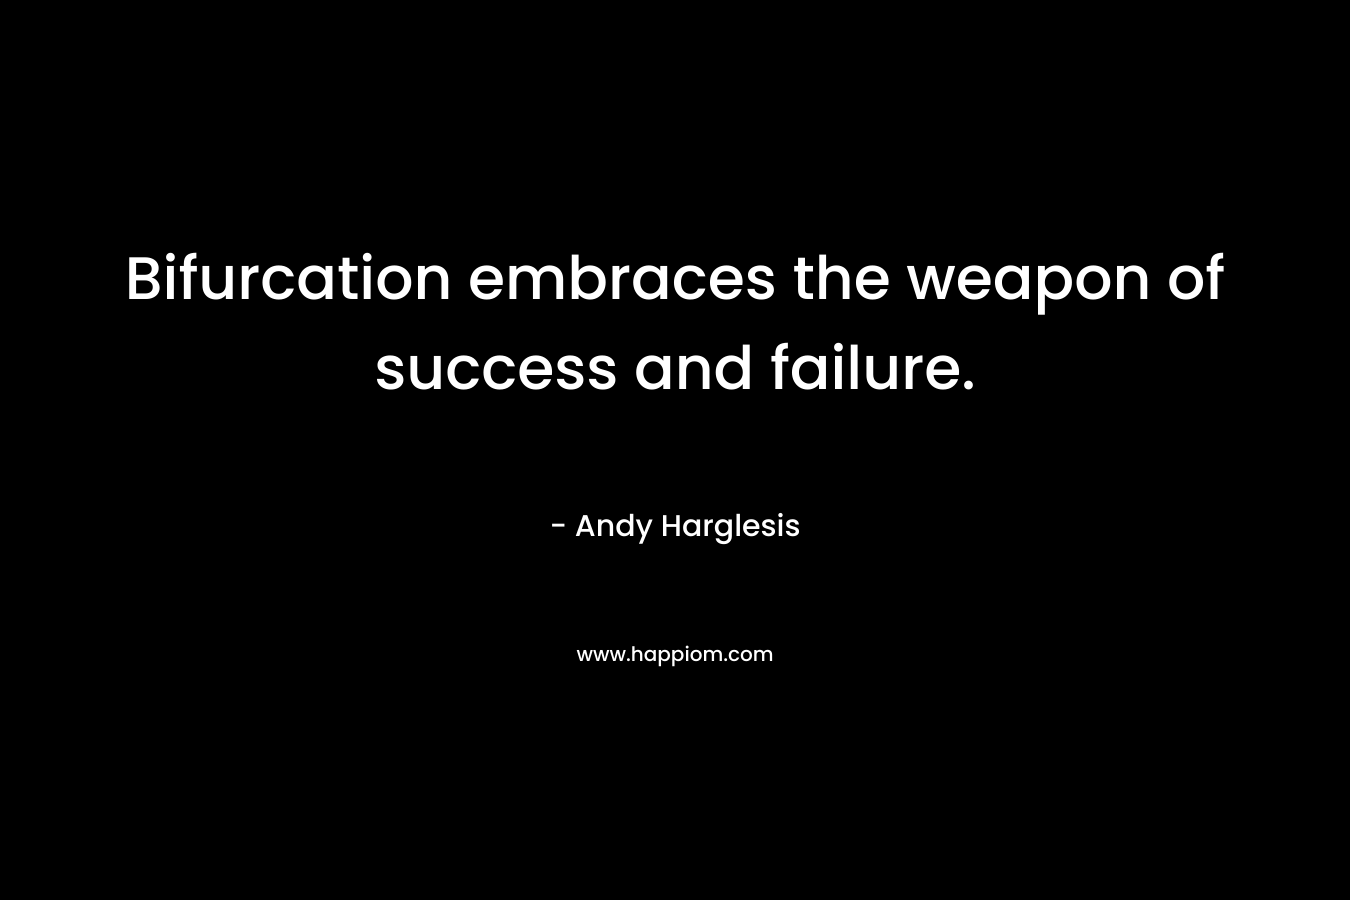 Bifurcation embraces the weapon of success and failure.